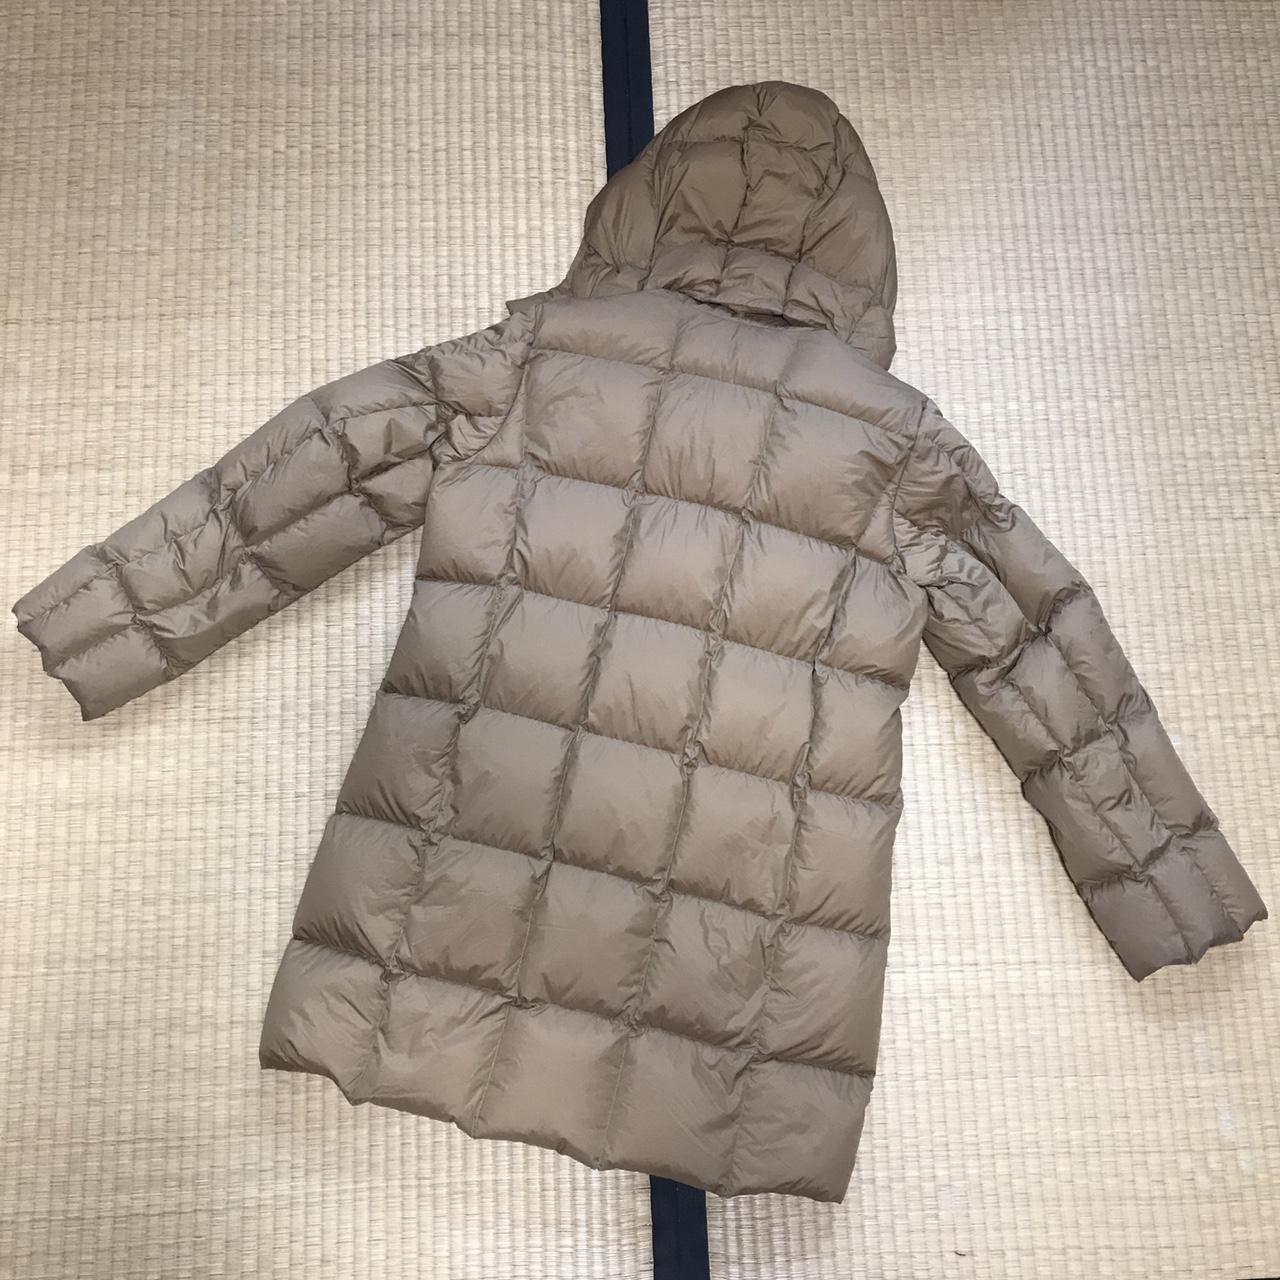 Uniqlo long quilted down puffer jacket in tan. Comes... - Depop